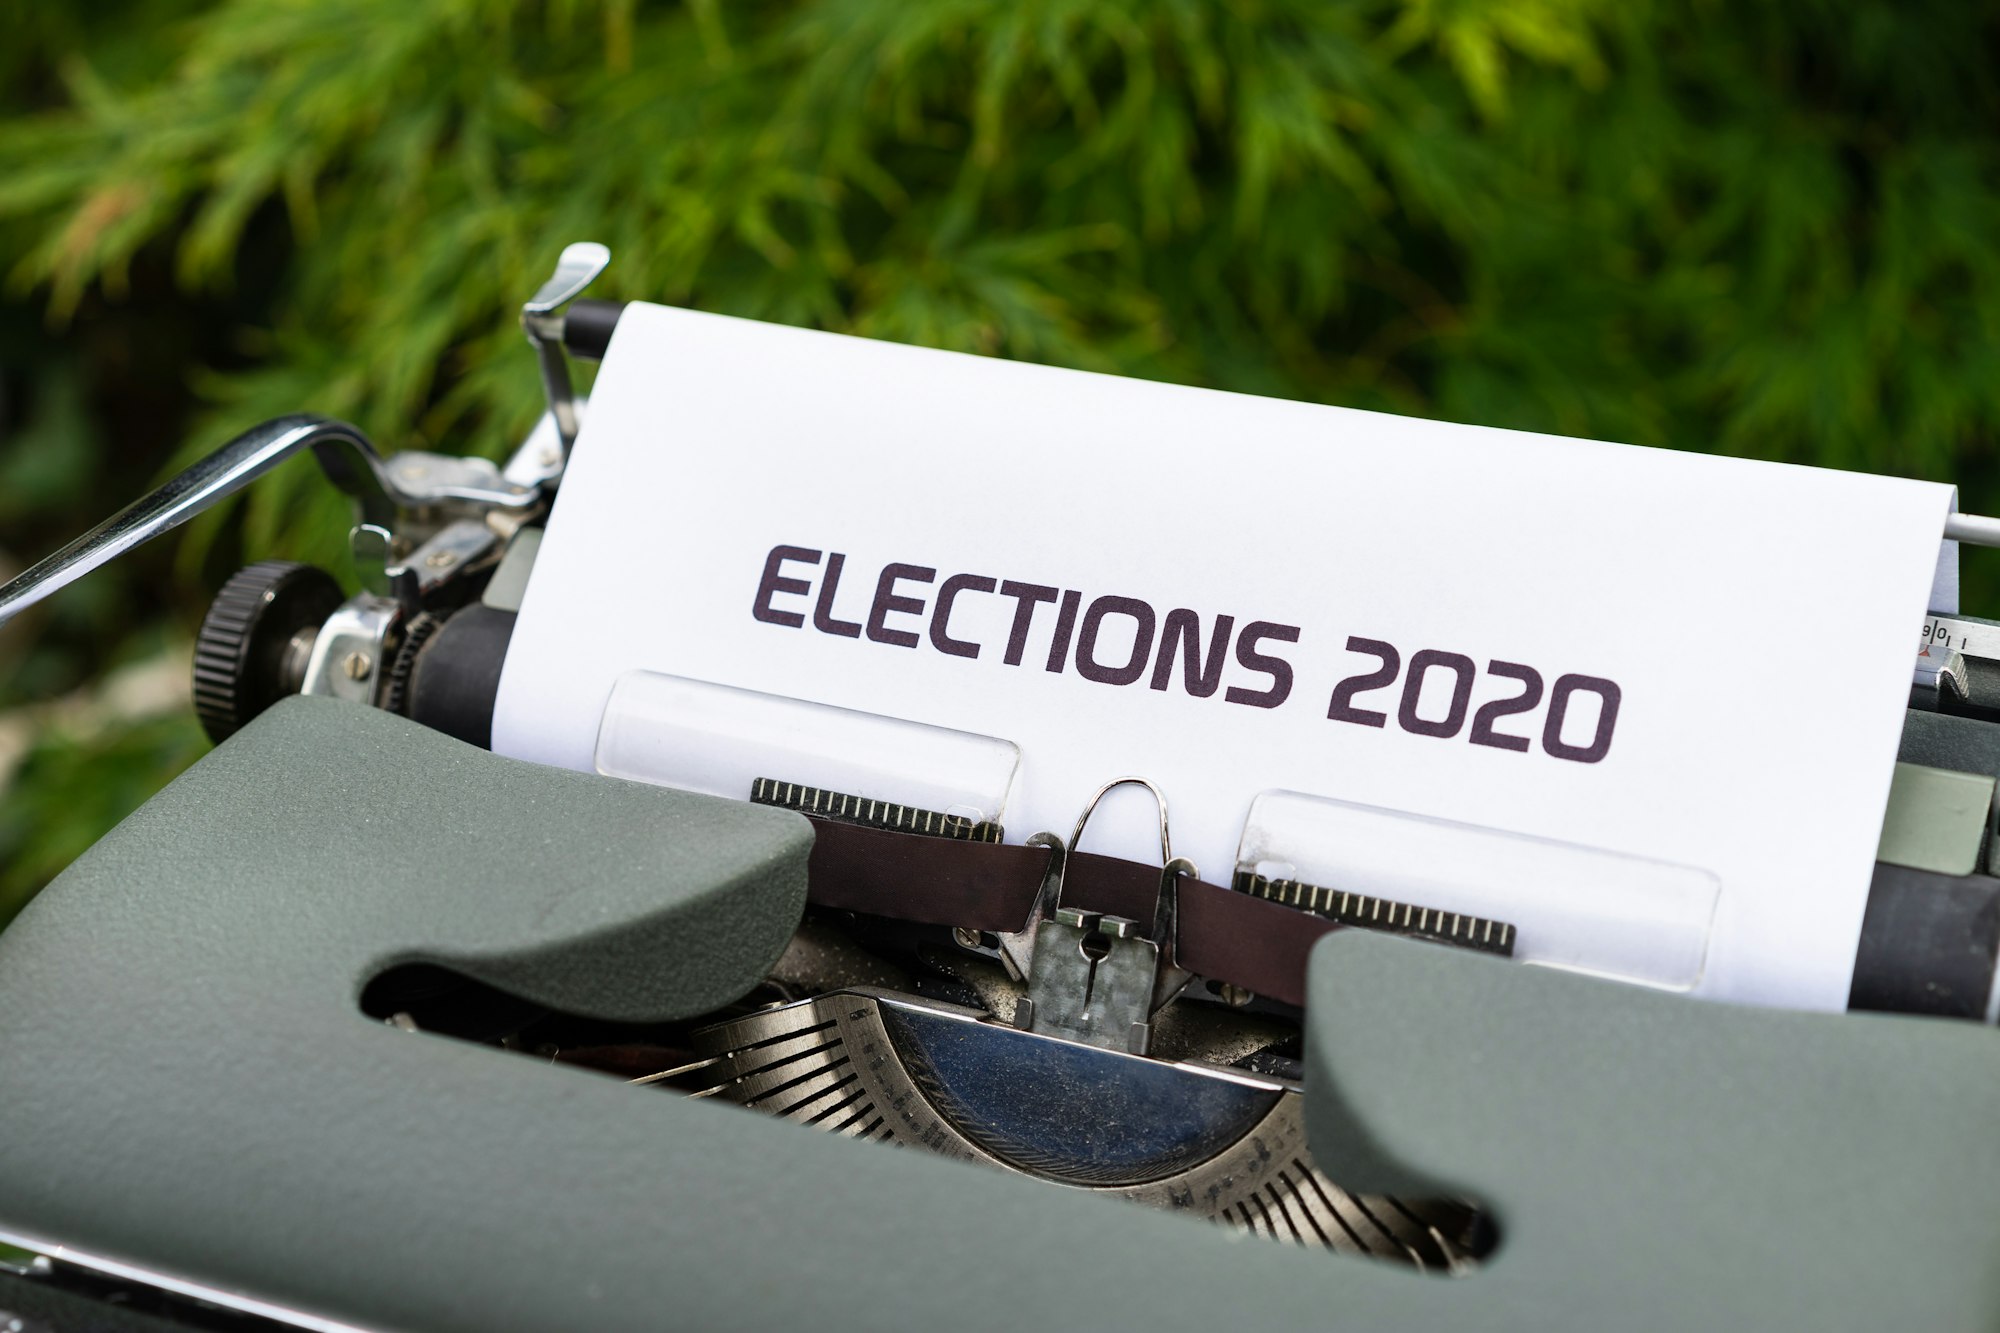 Feature Article: Election focus! Should you buy / sell now? Or wait?